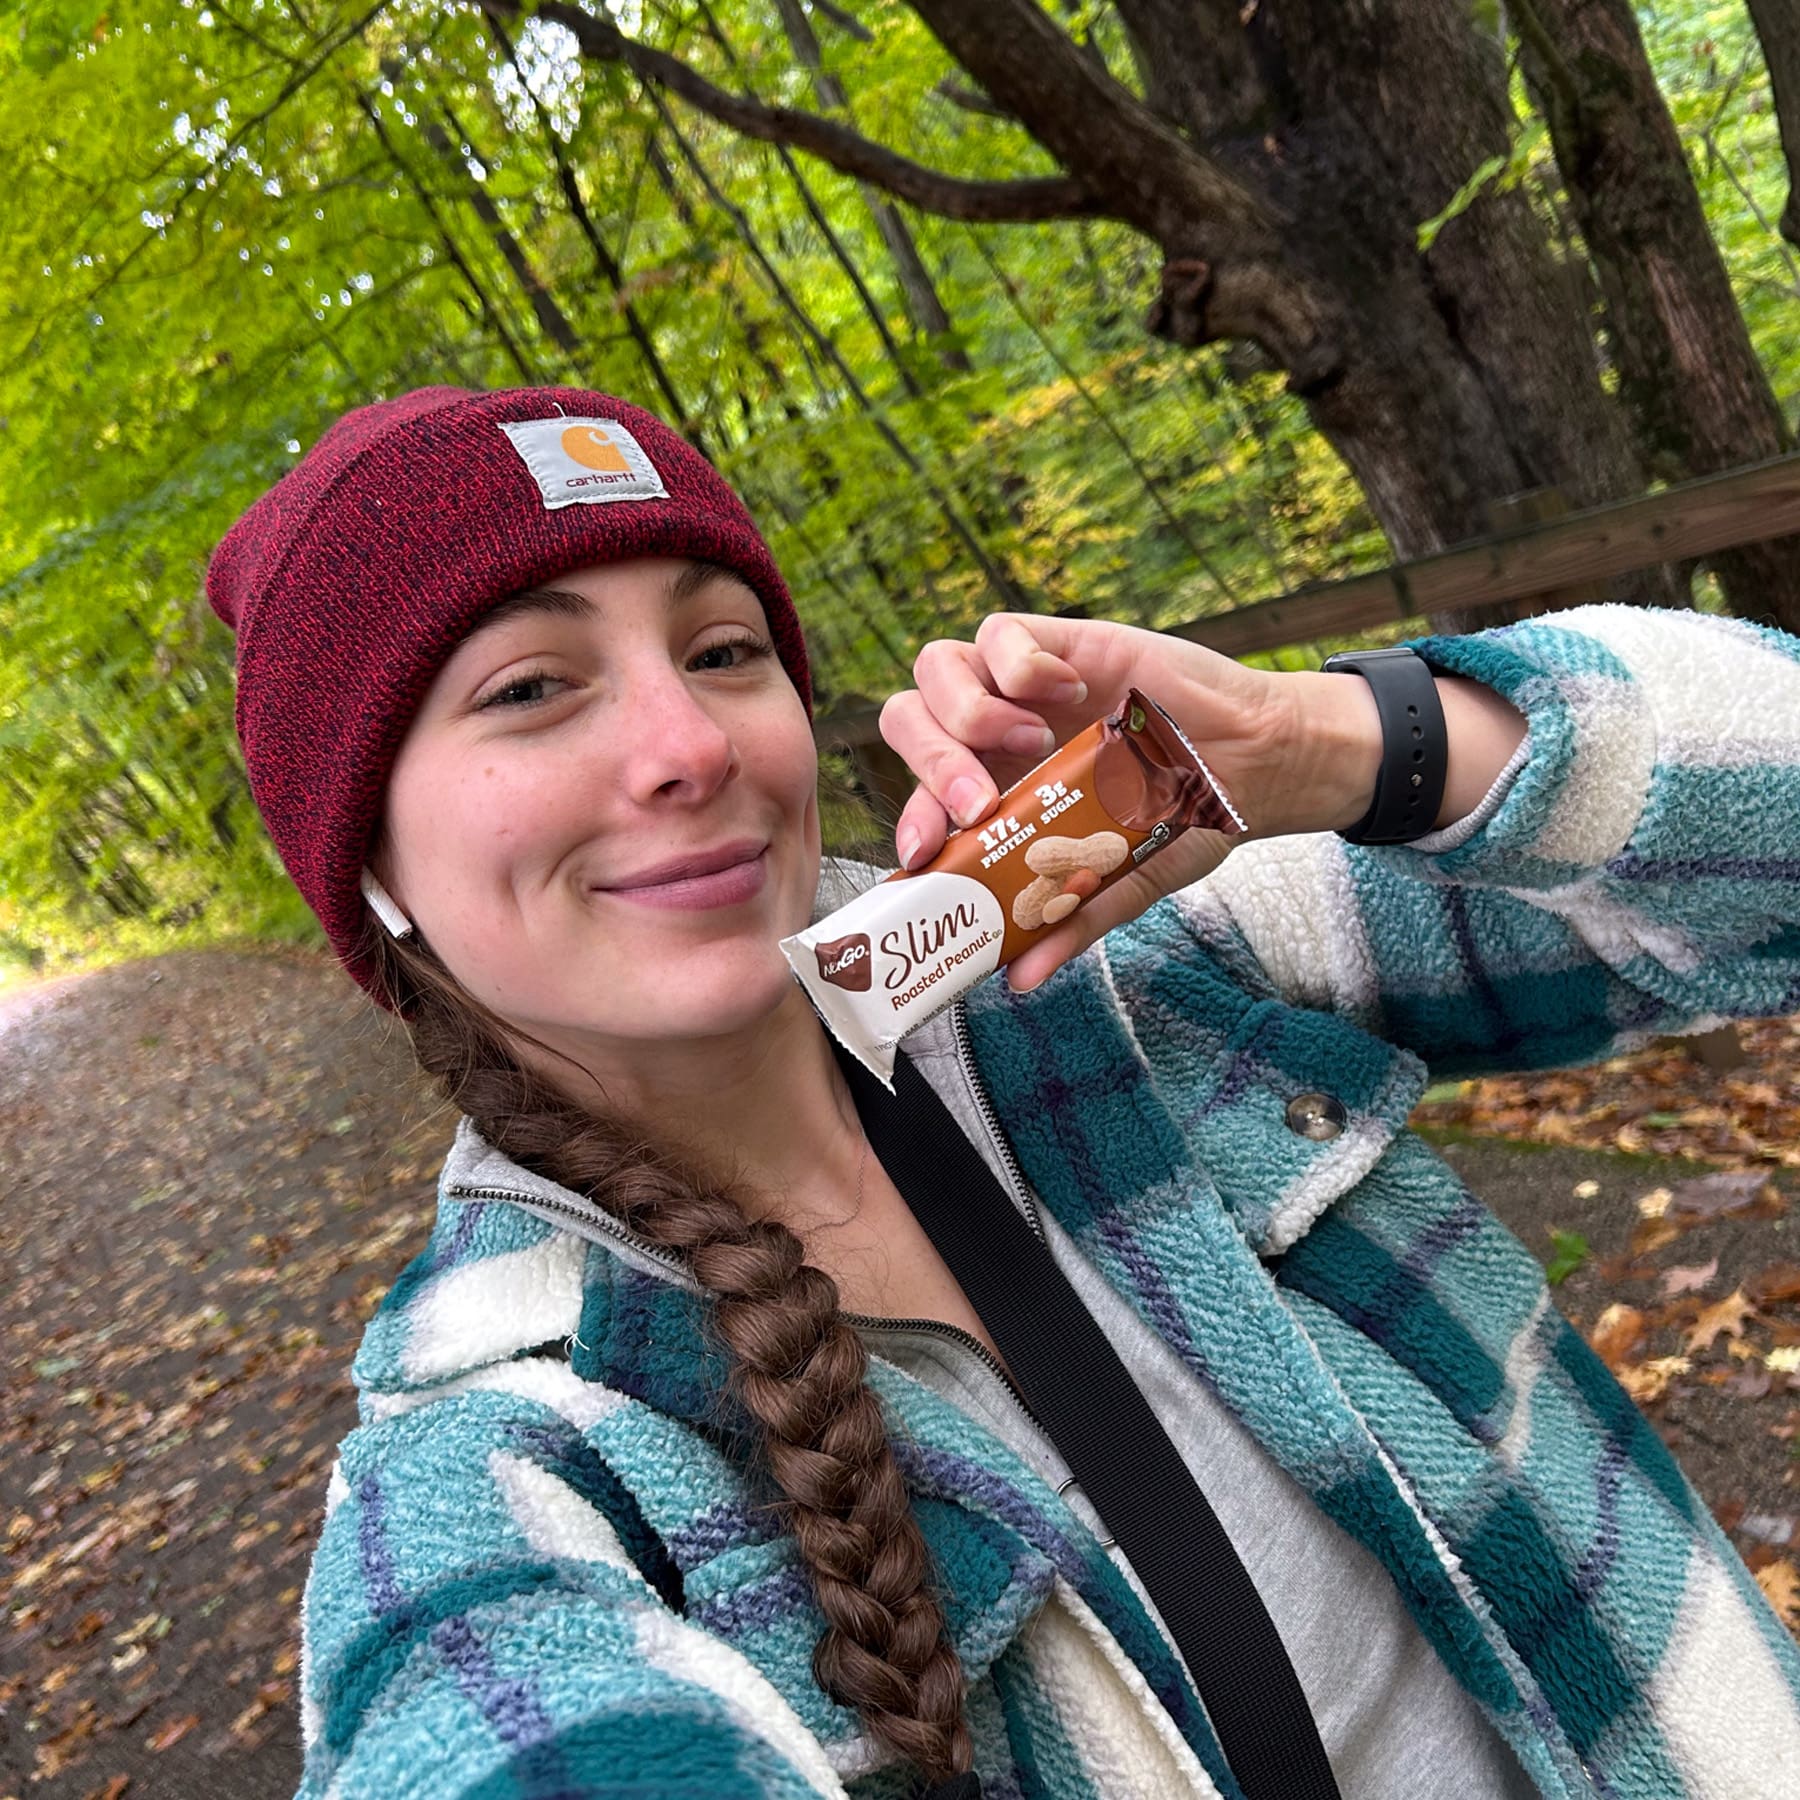 Woman holding Roasted Peanut Bar in Woods